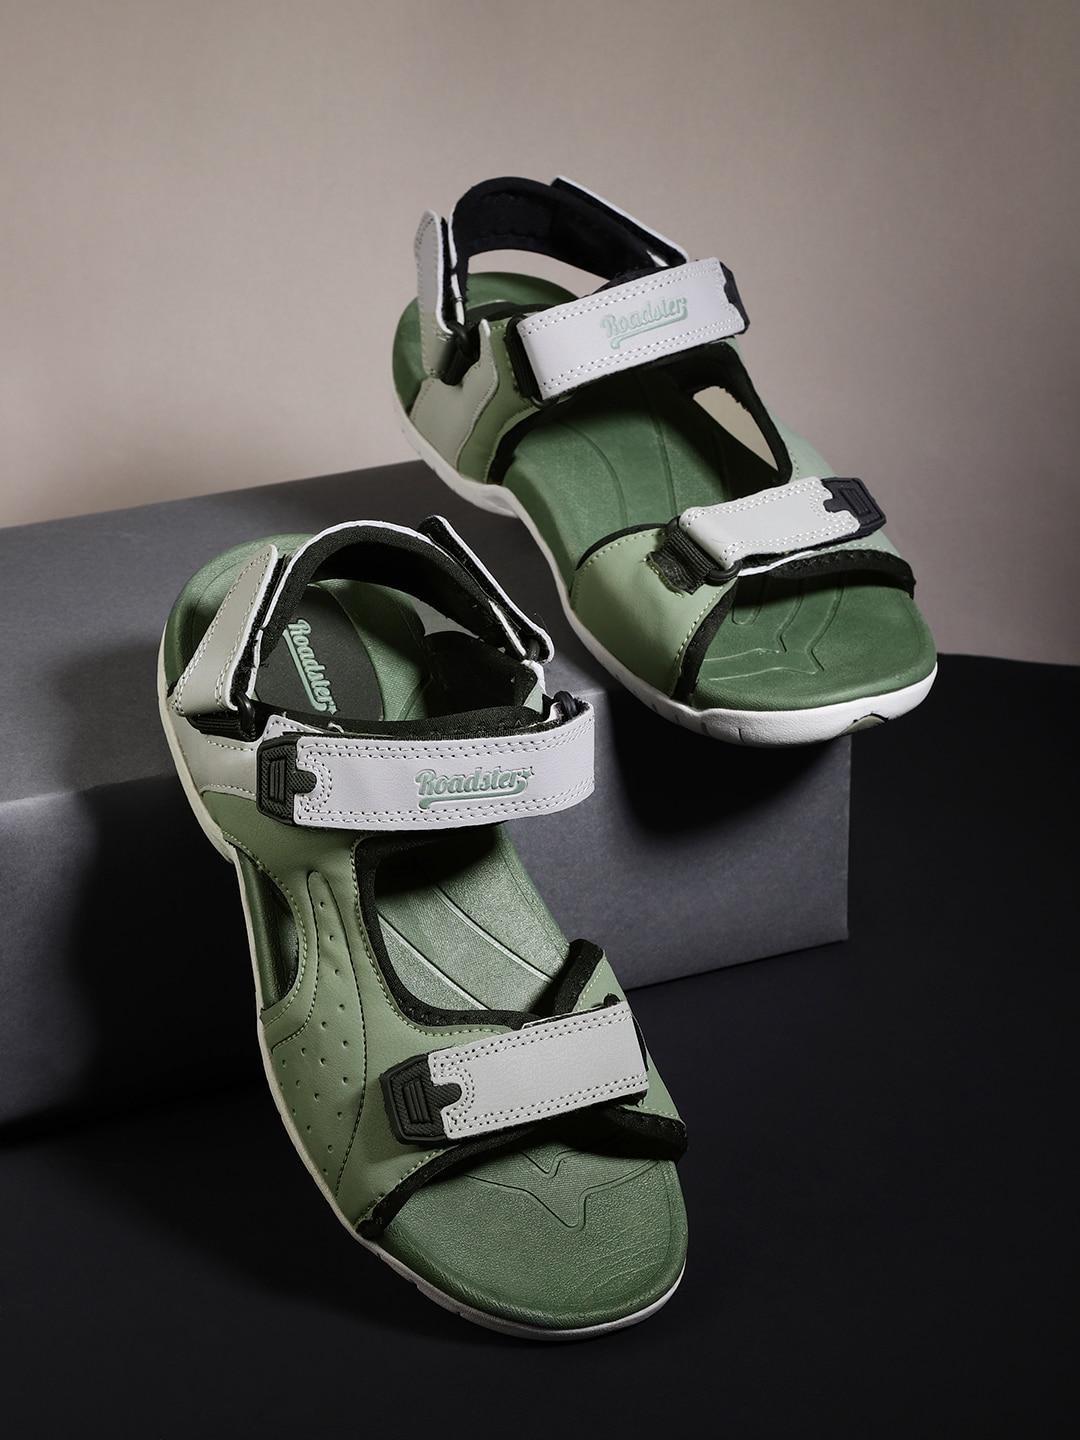 The Roadster Lifestyle Co Men Green & Grey Colorblocked Sports Sandals